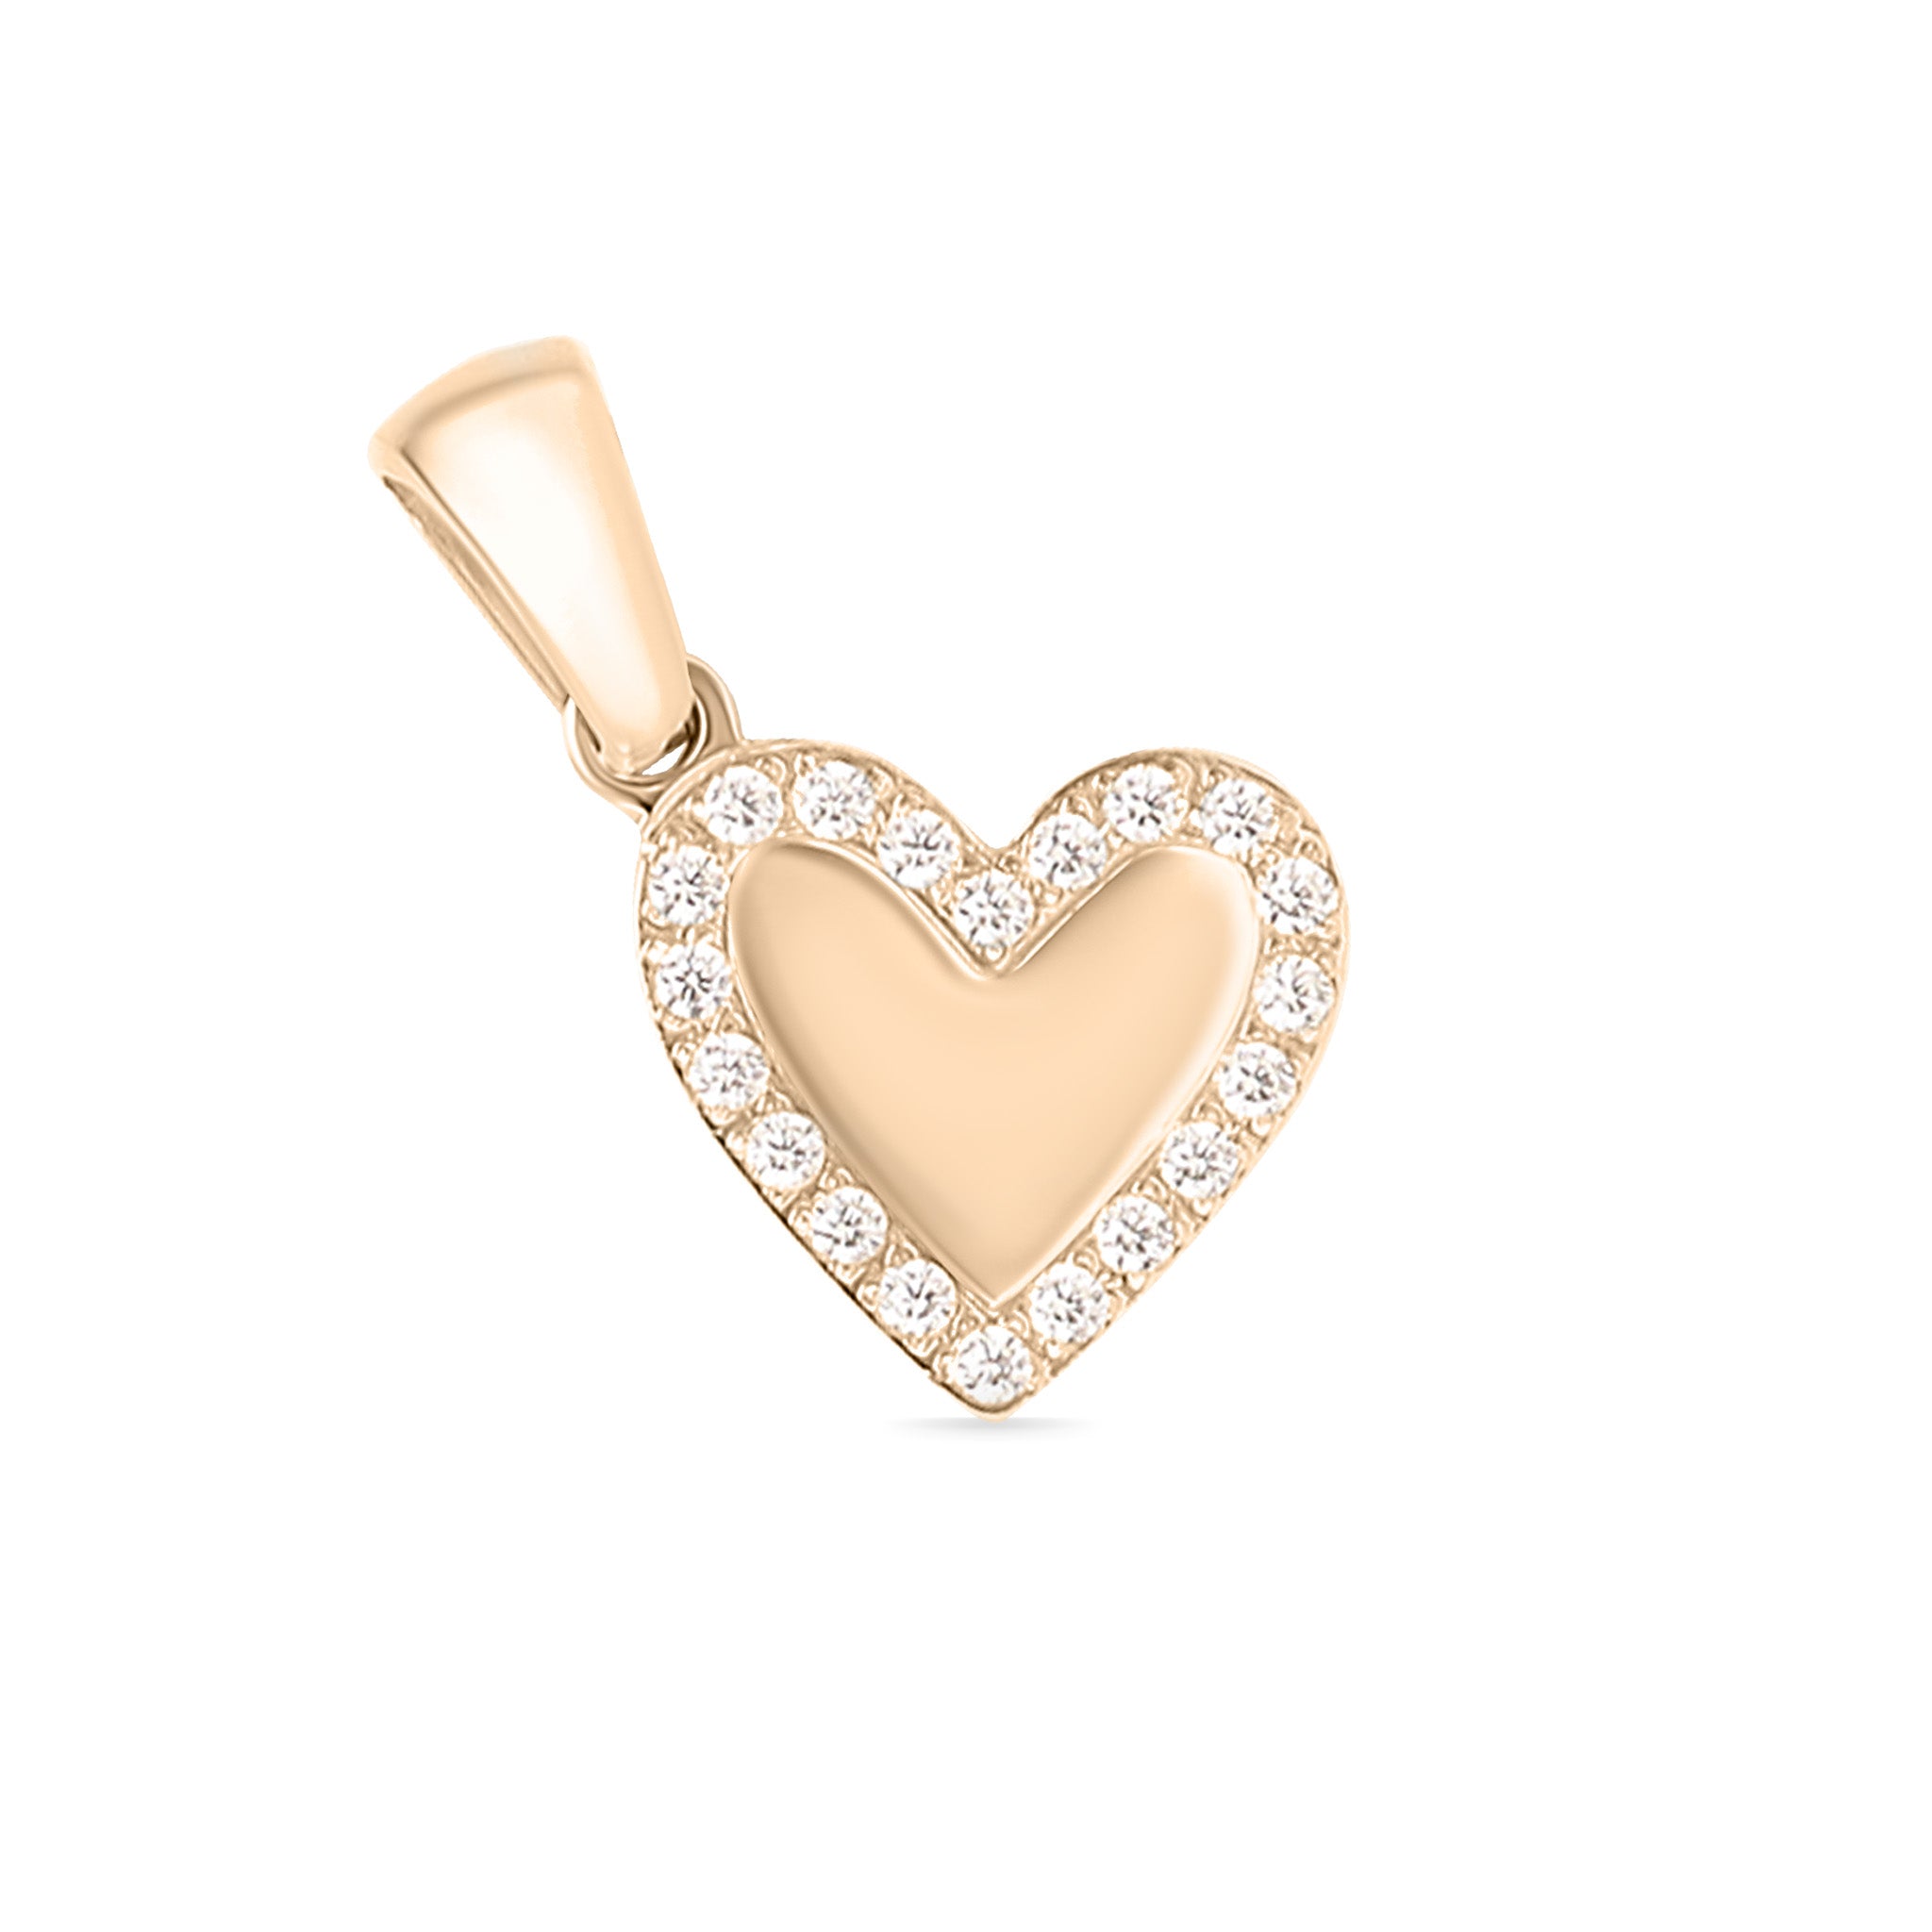 Personalized Engraved Heart Charm for Bangle Bracelet in 18K Gold Rose Gold  Silver 925 Without Bracelet Extra Heart Charms for Bracelets 